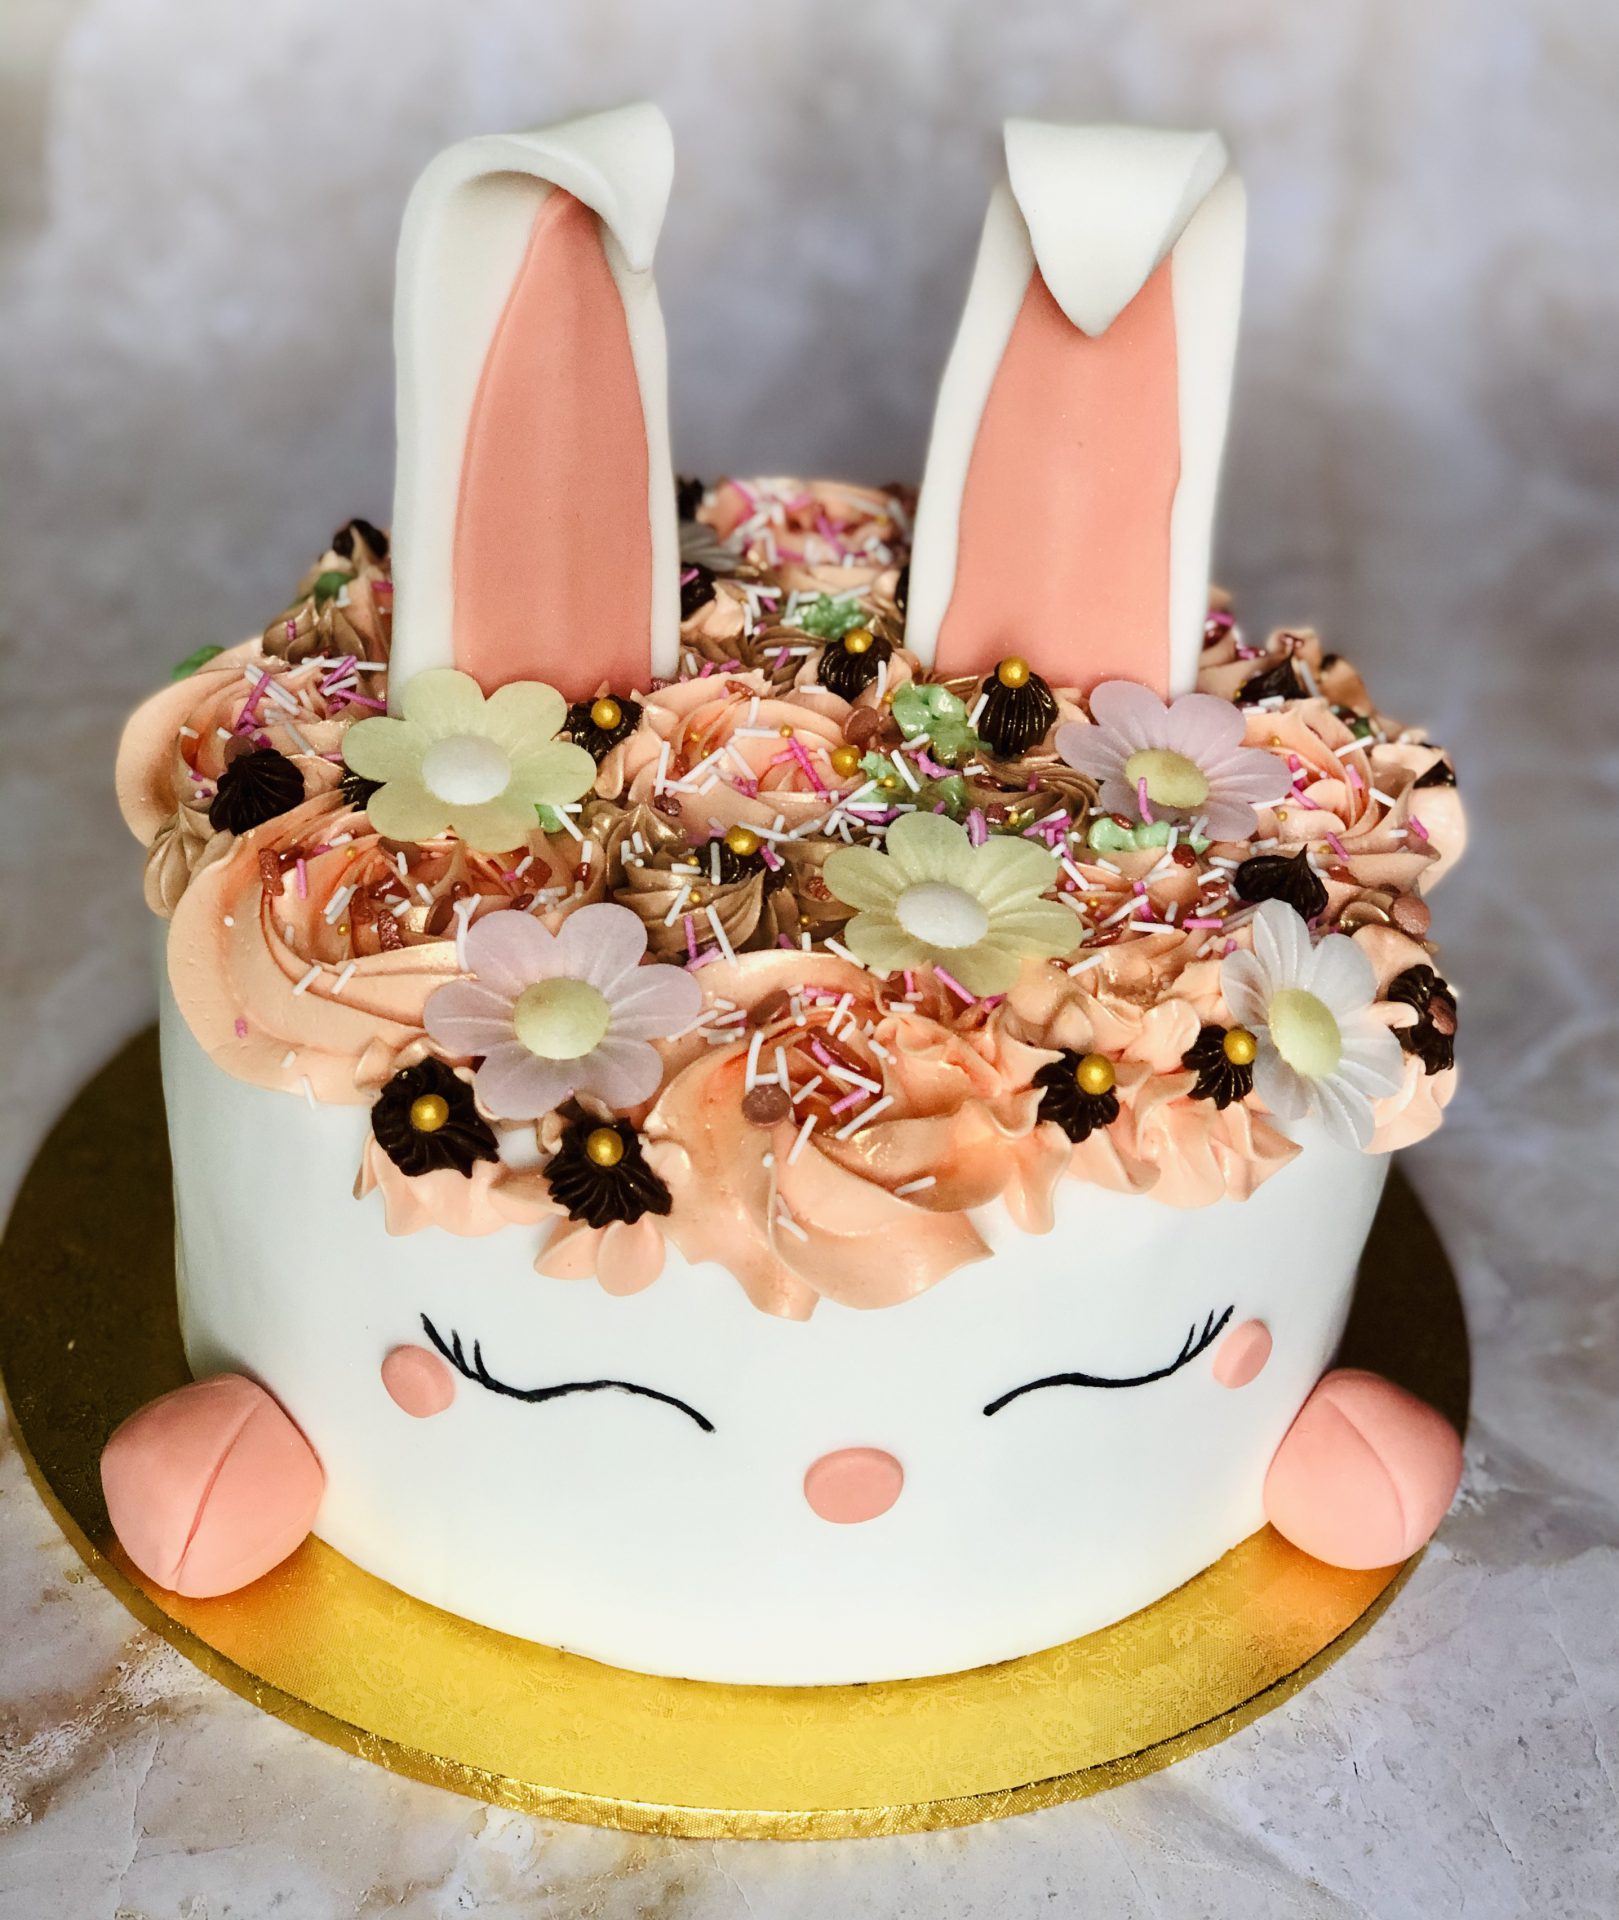 Easy Bunny Butt Cake Recipe for Easter – Sugar Geek Show